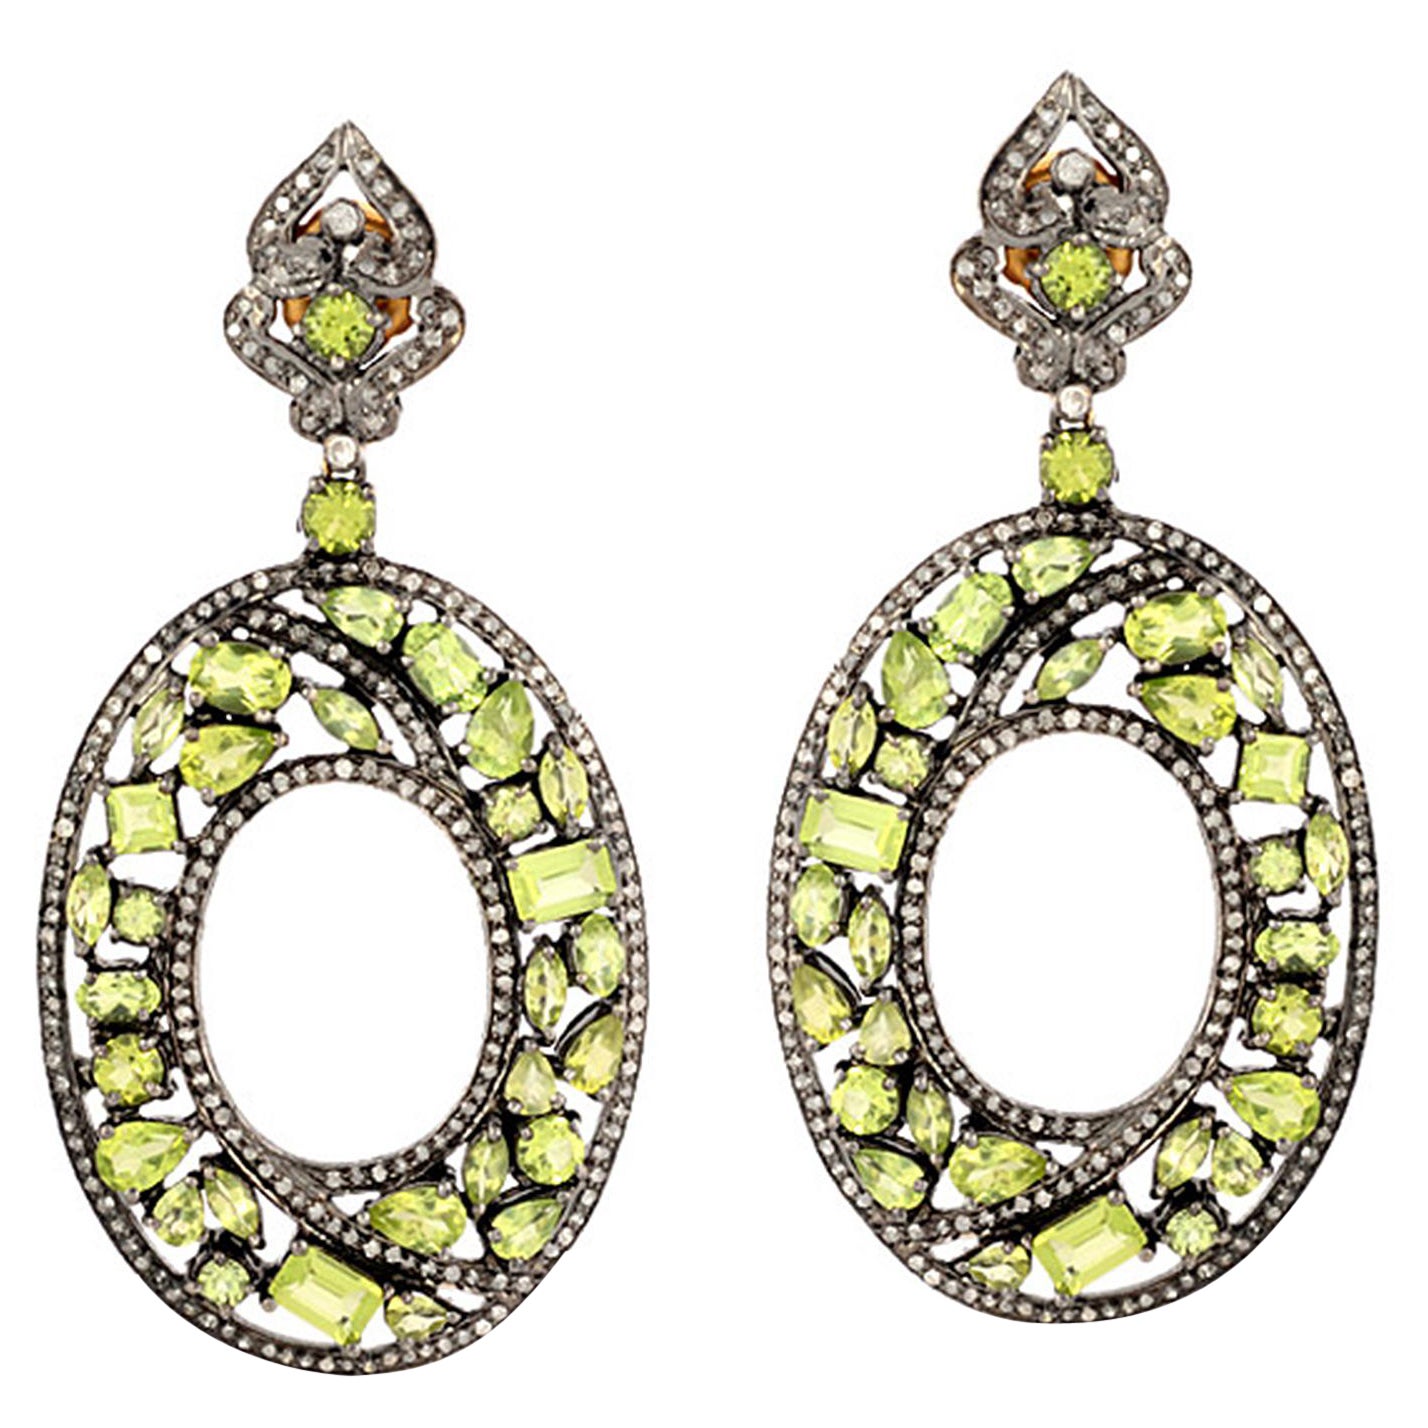 Mixed Shaped Peridot Earrings with Diamonds Made in 18k Yellow Gold & Silver